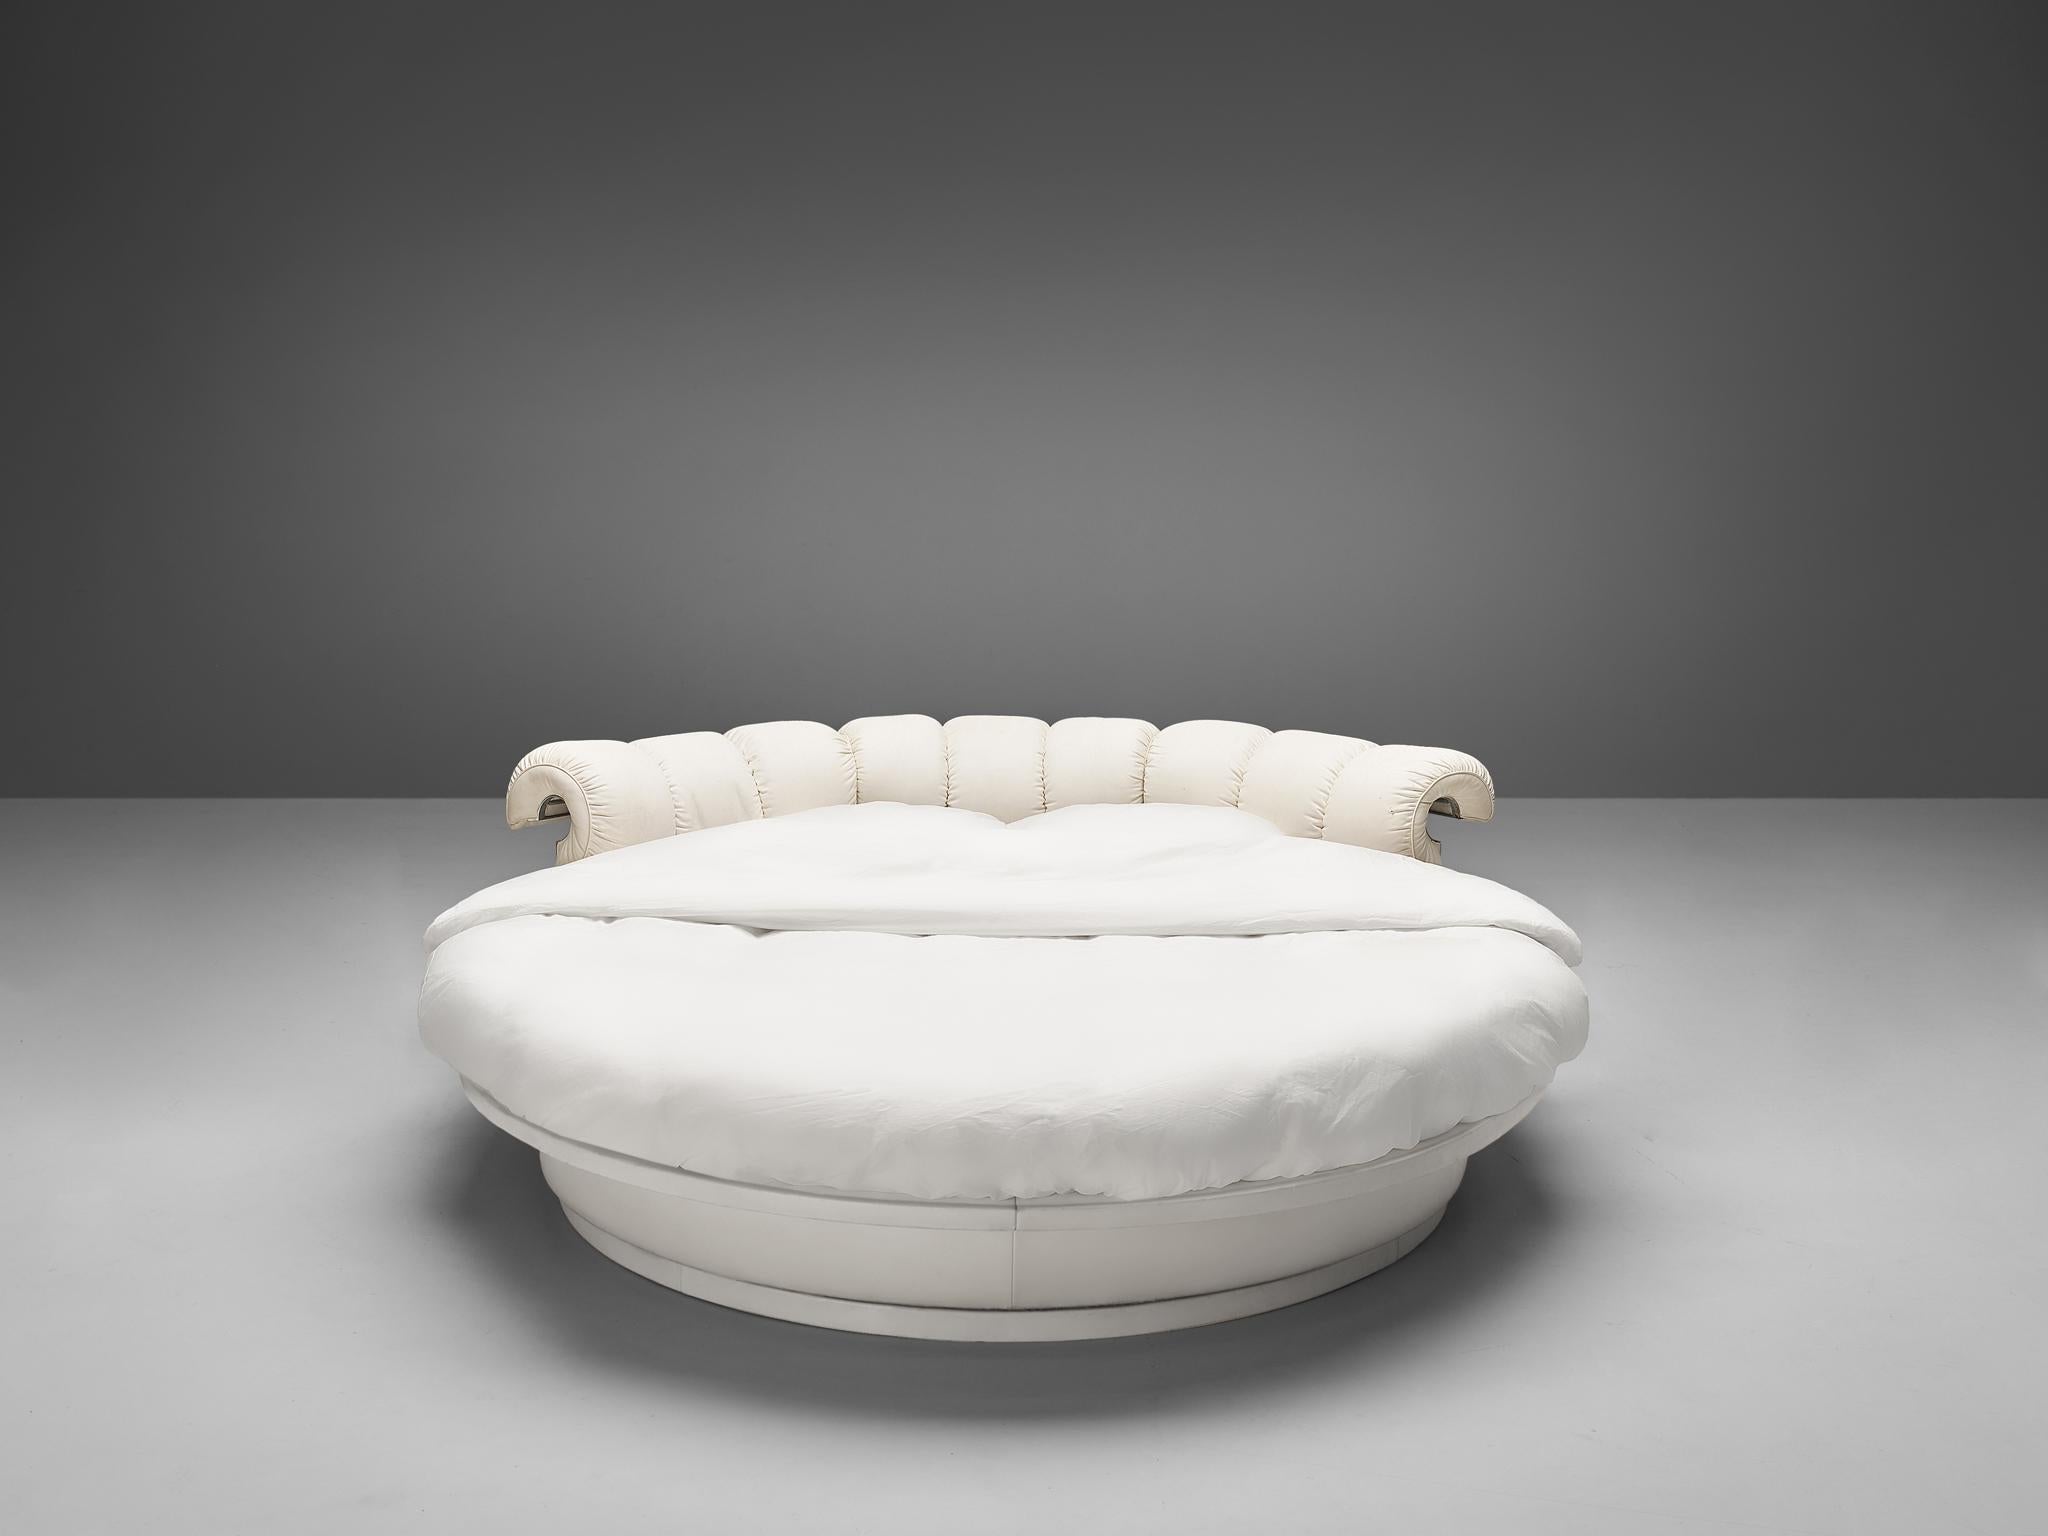 Luigi Massoni for Poltrona Frau, 'Lullaby Due' bed, leather, wood, chromed metal, plastic, Italy, designed in 1968

A 360° degrees rotating bed named 'Lullaby Due' features a headrest with a wing-shaped silhouette that shows a clear rhythm by